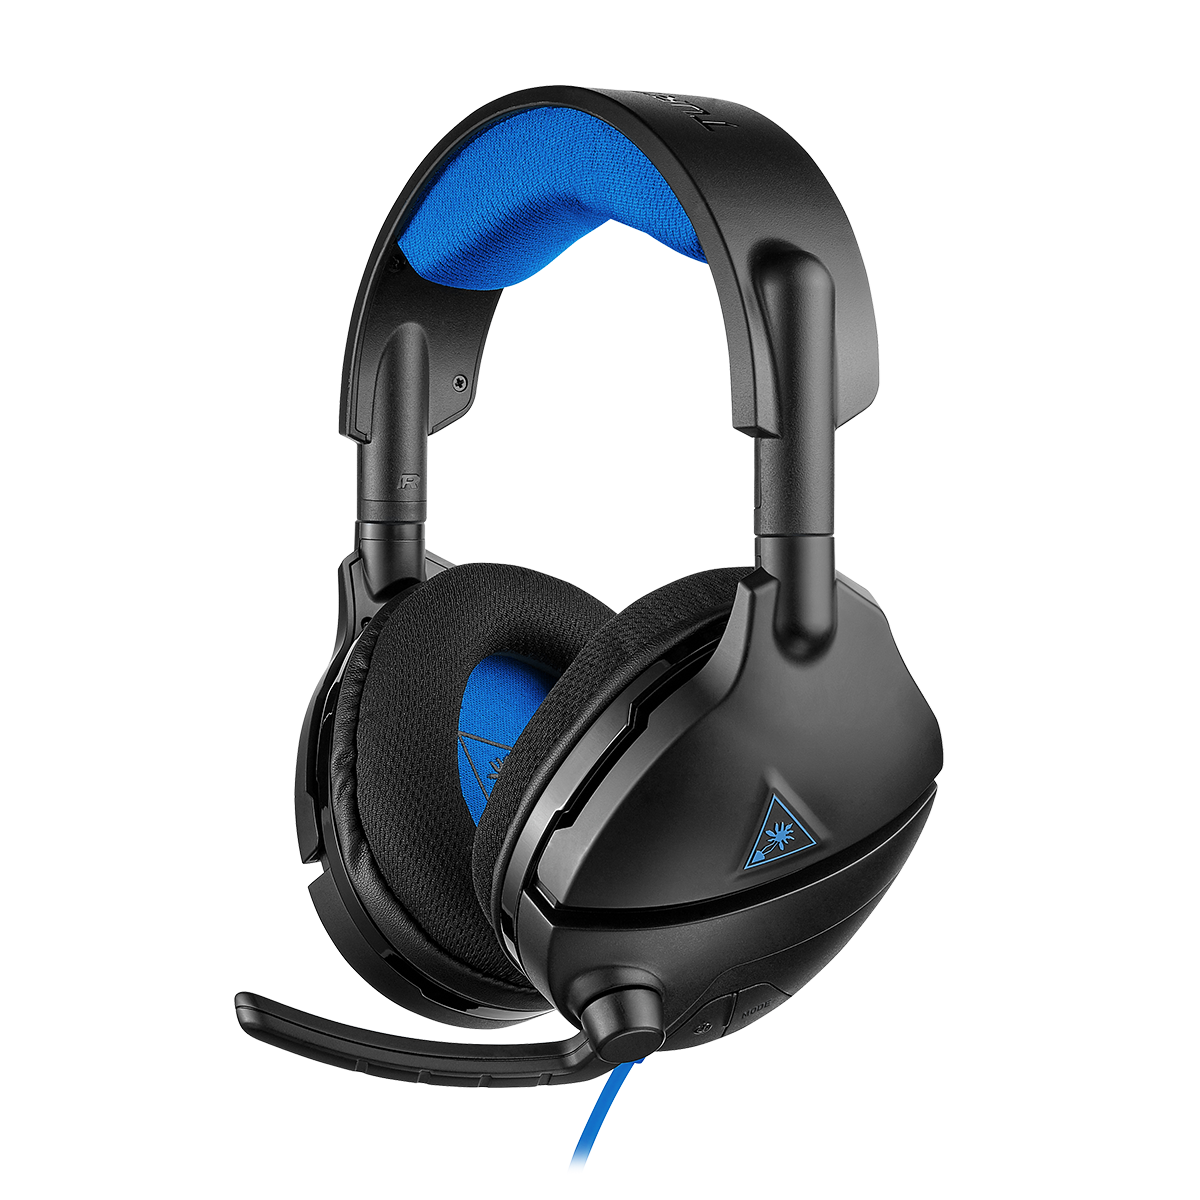 turtle beach headset blue and black